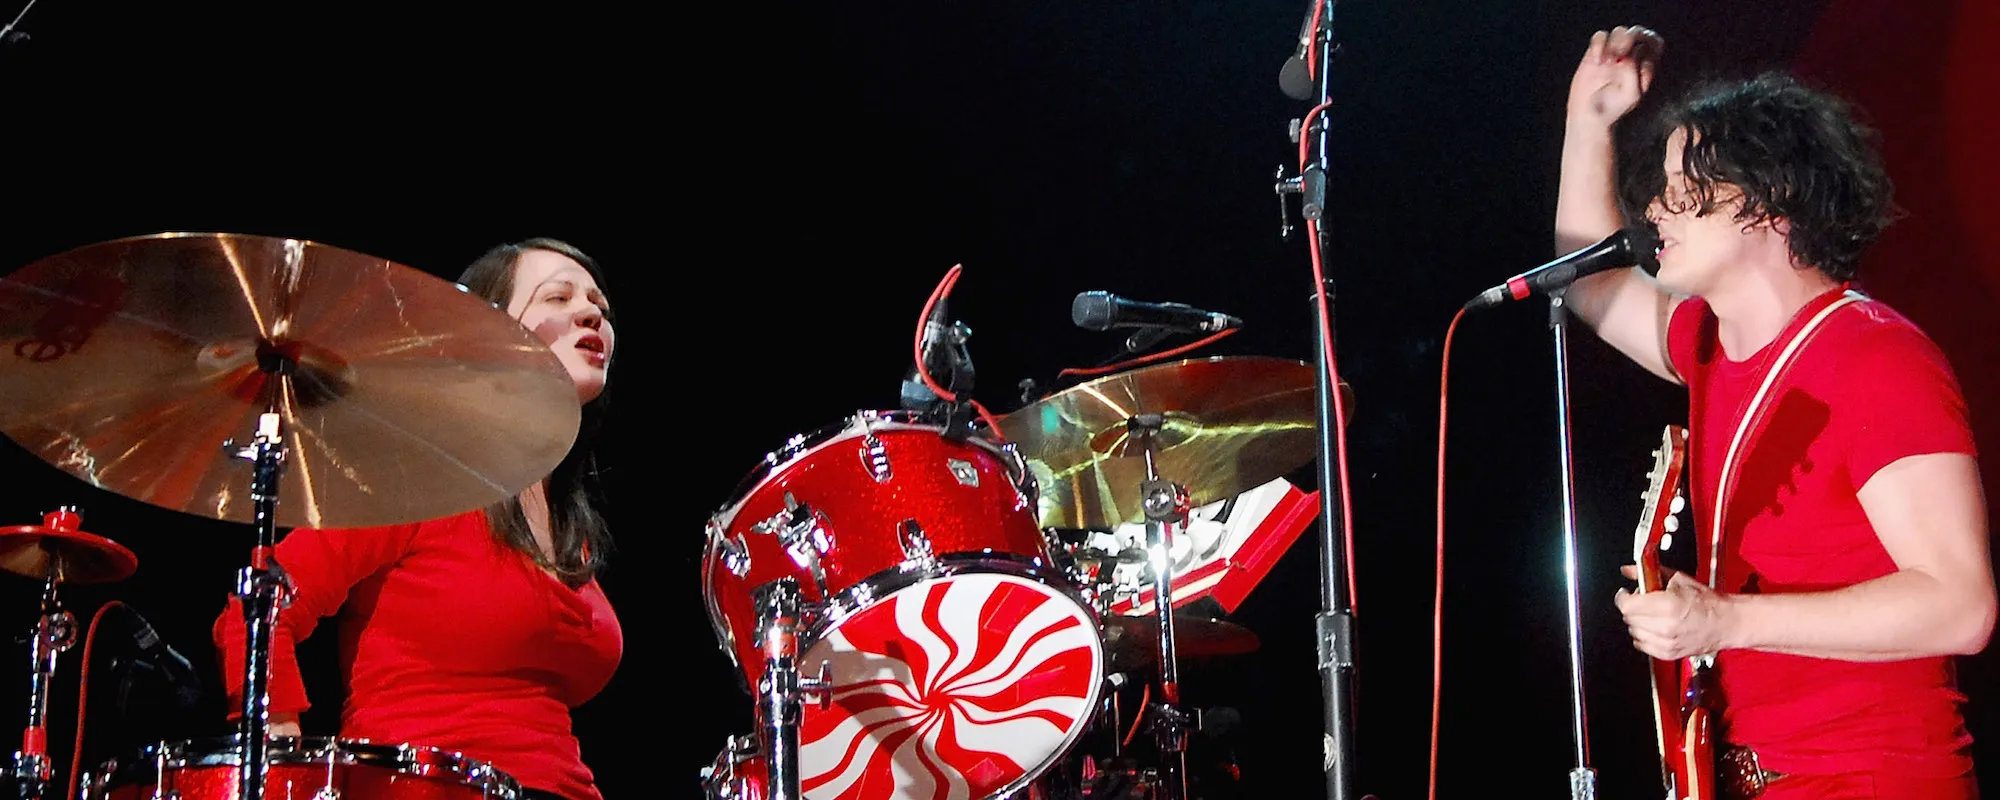 How The White Stripes’ “Seven Nation Army” Became a Universal Sports Anthem